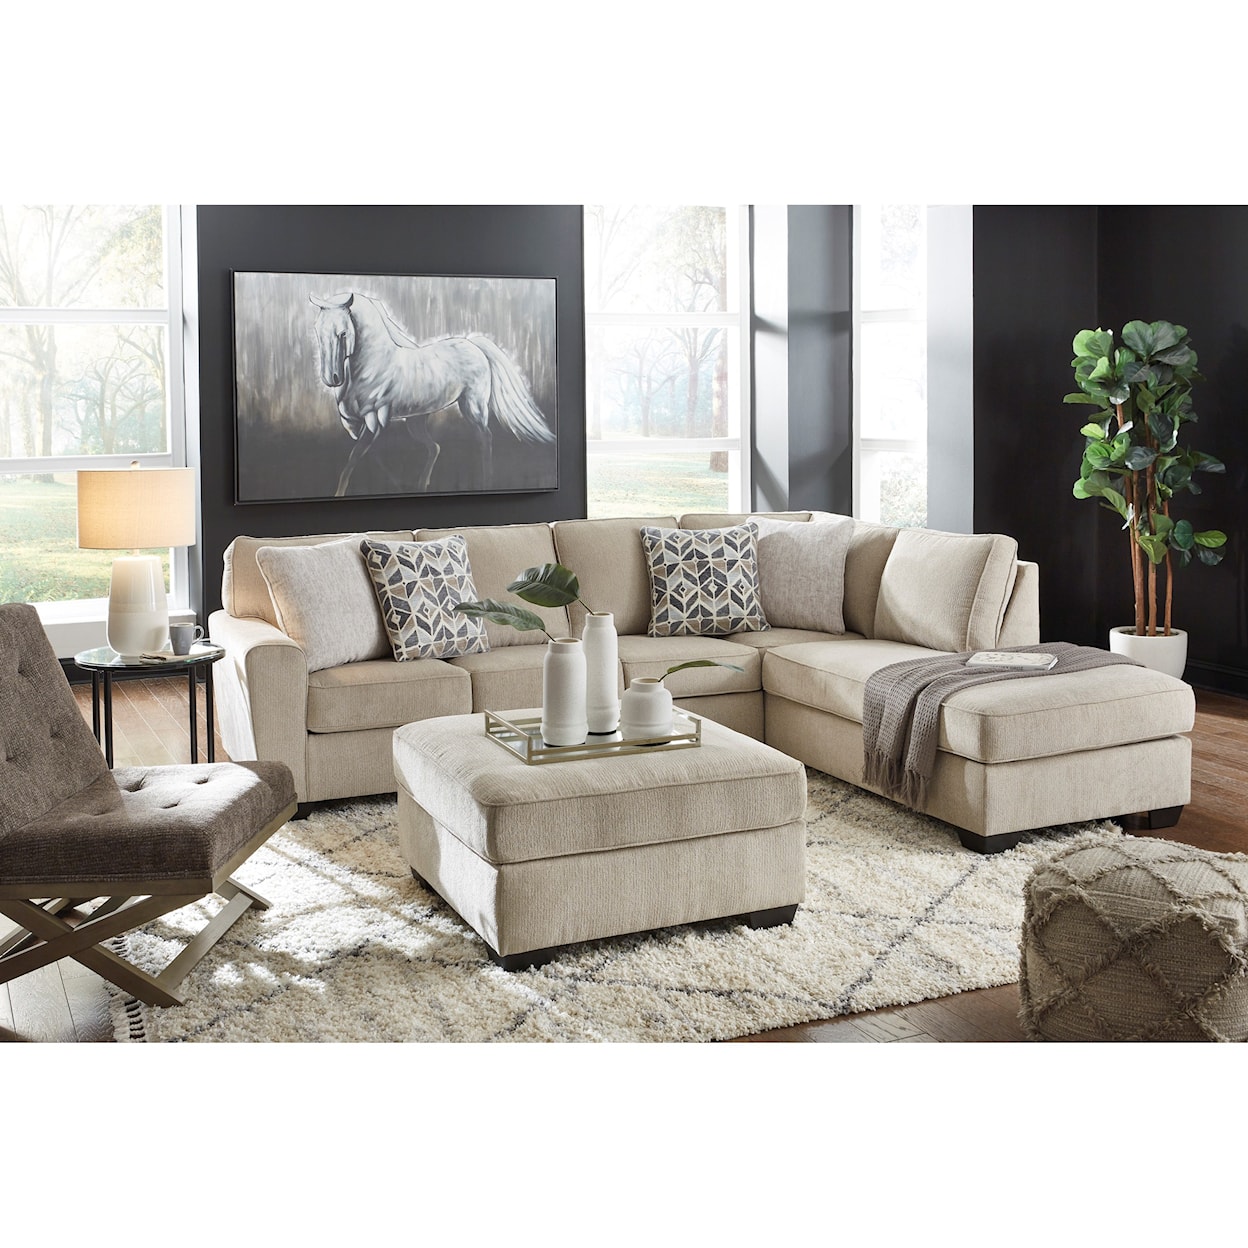 Signature Design by Ashley Decelle Living Room Group